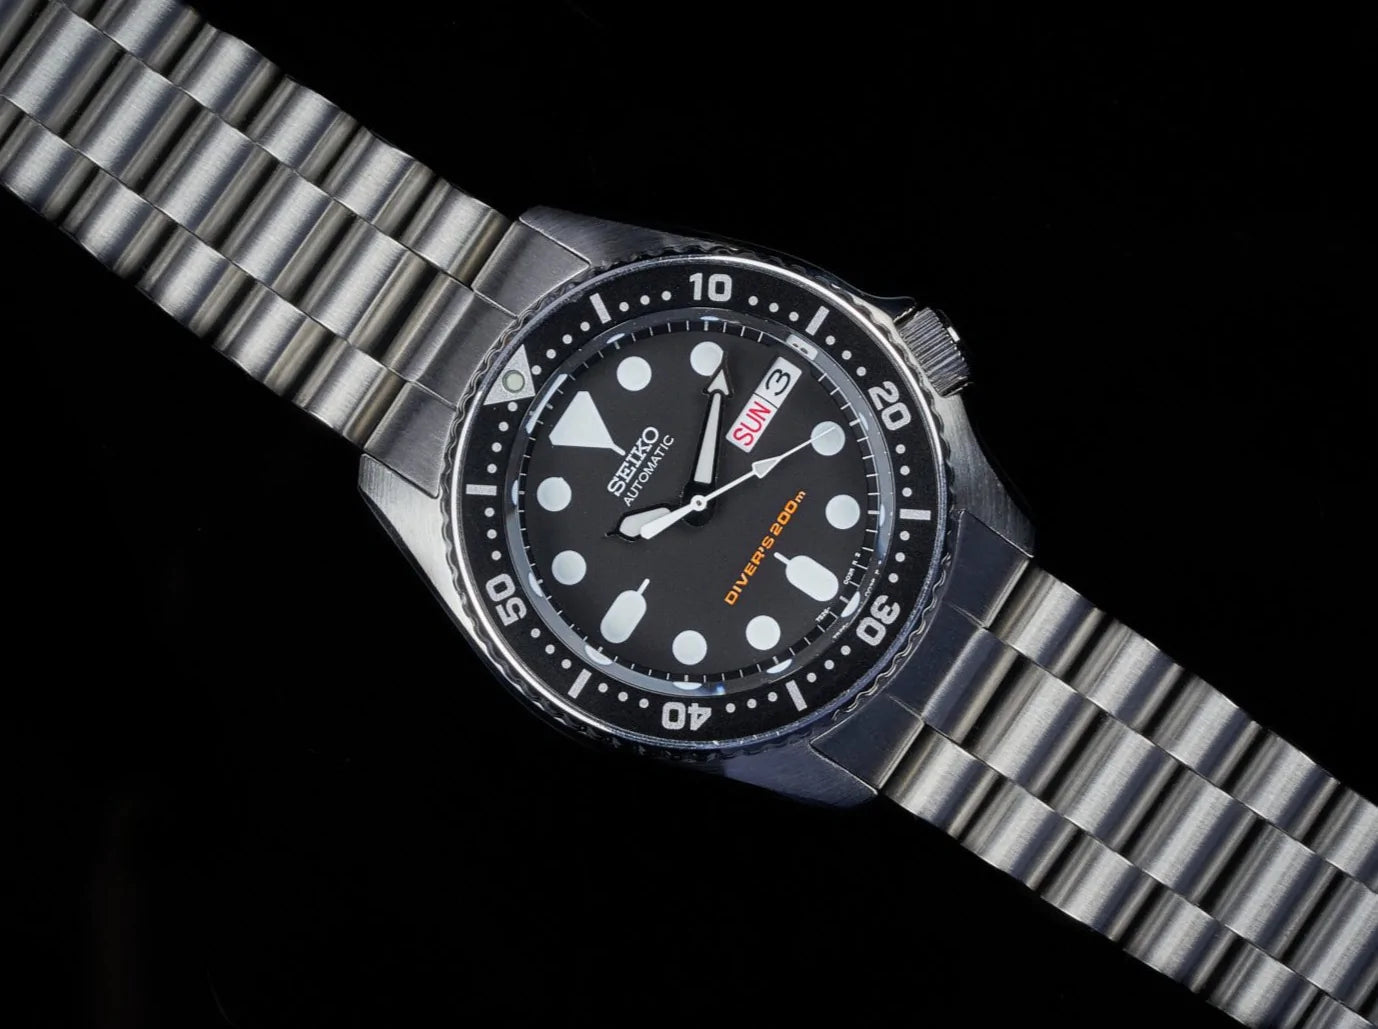 Seiko SKX013 for $386 for sale from a Private Seller on Chrono24